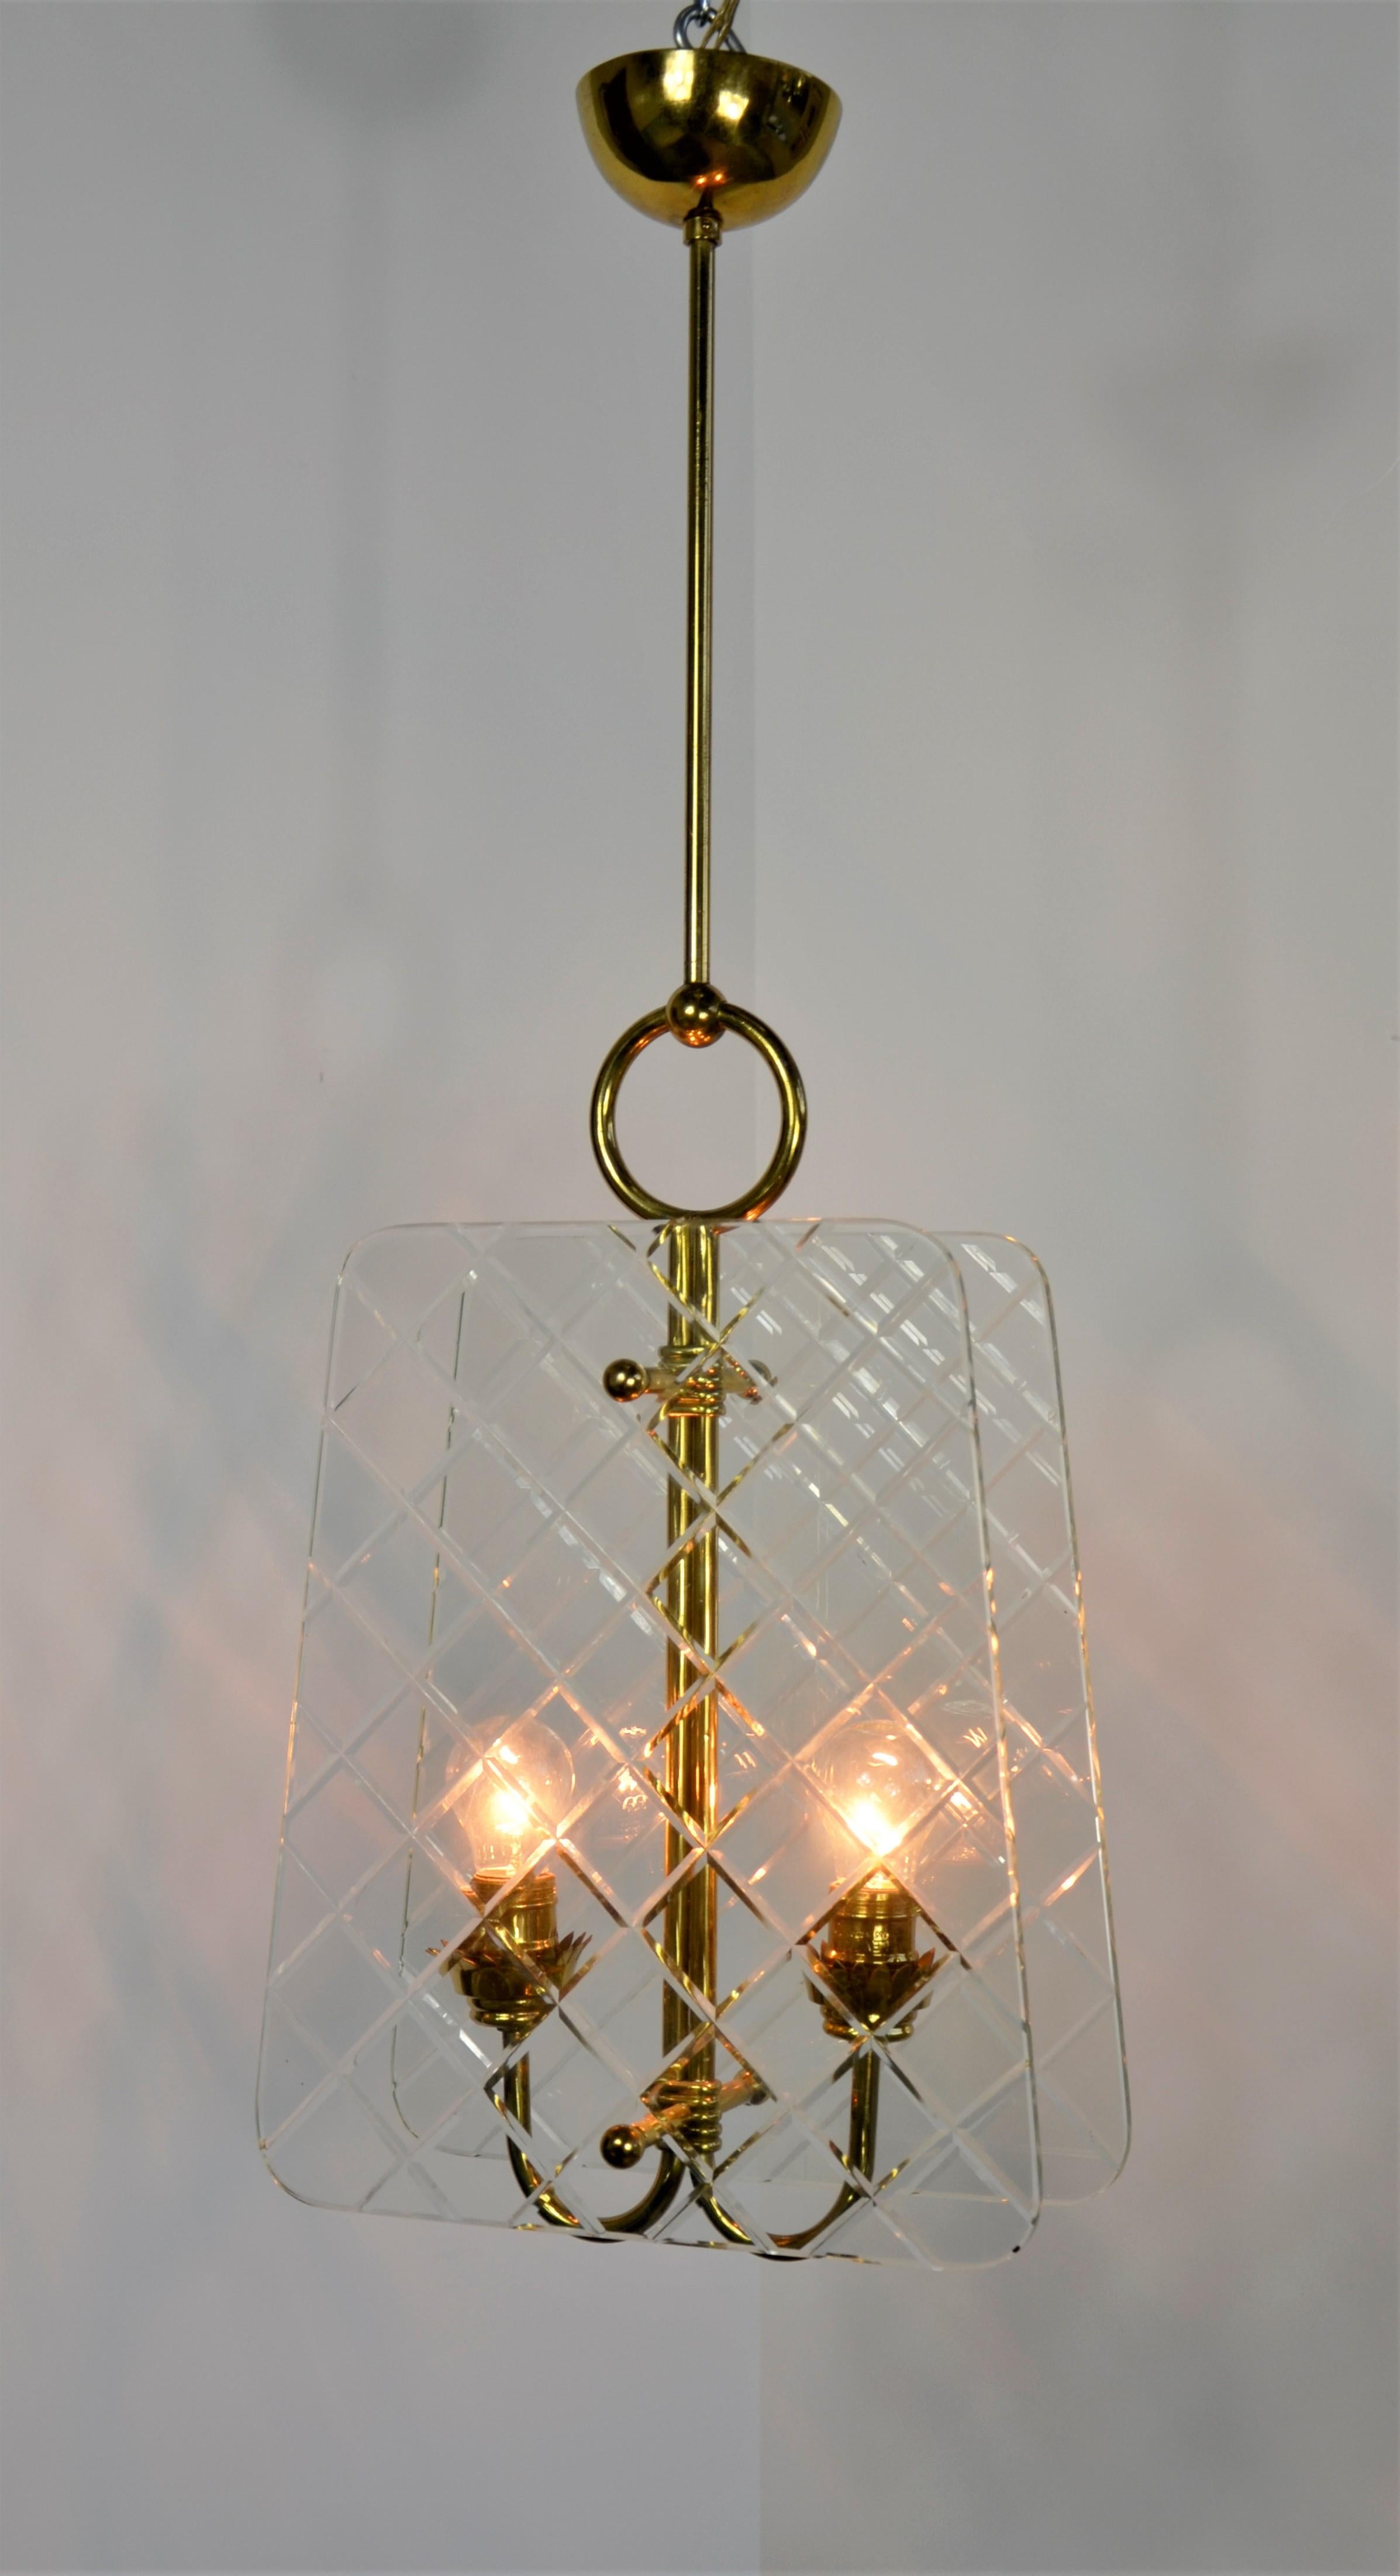 Offered is a Mid-Century Modern Italian Pietro Chiesa for Fontana Arte brass and harlequin pattern cut glass chandelier. This elegant chandelier is attributed to designer Pietro Chiesa. The photo of this piece speaks for itself. One of a kind